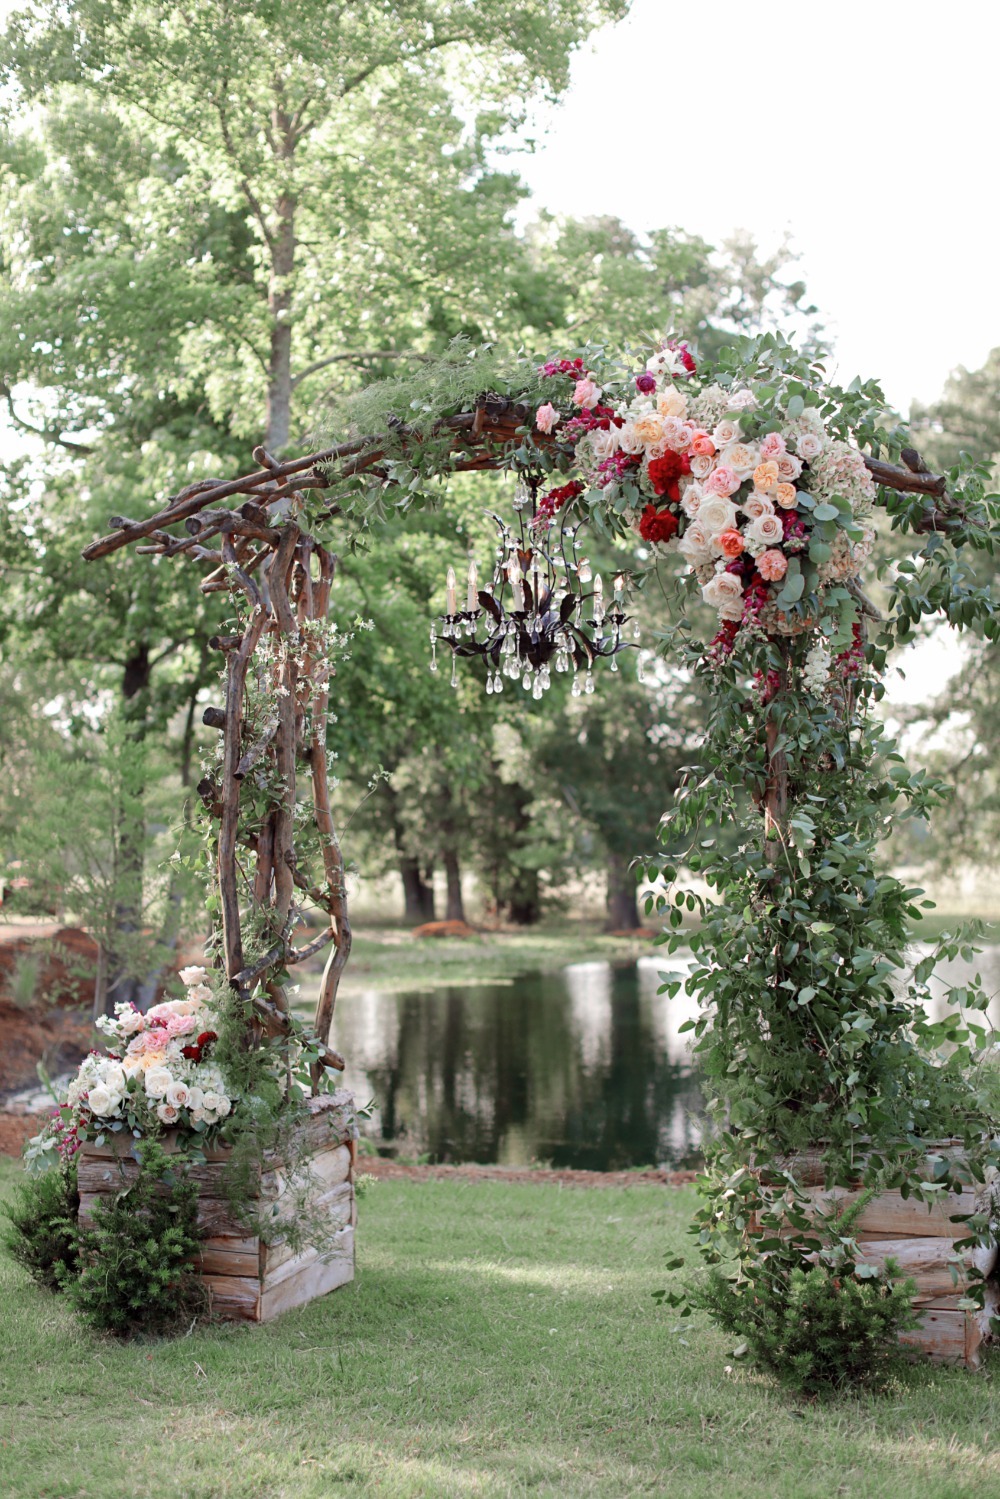 Giant floral arbor with chandelier